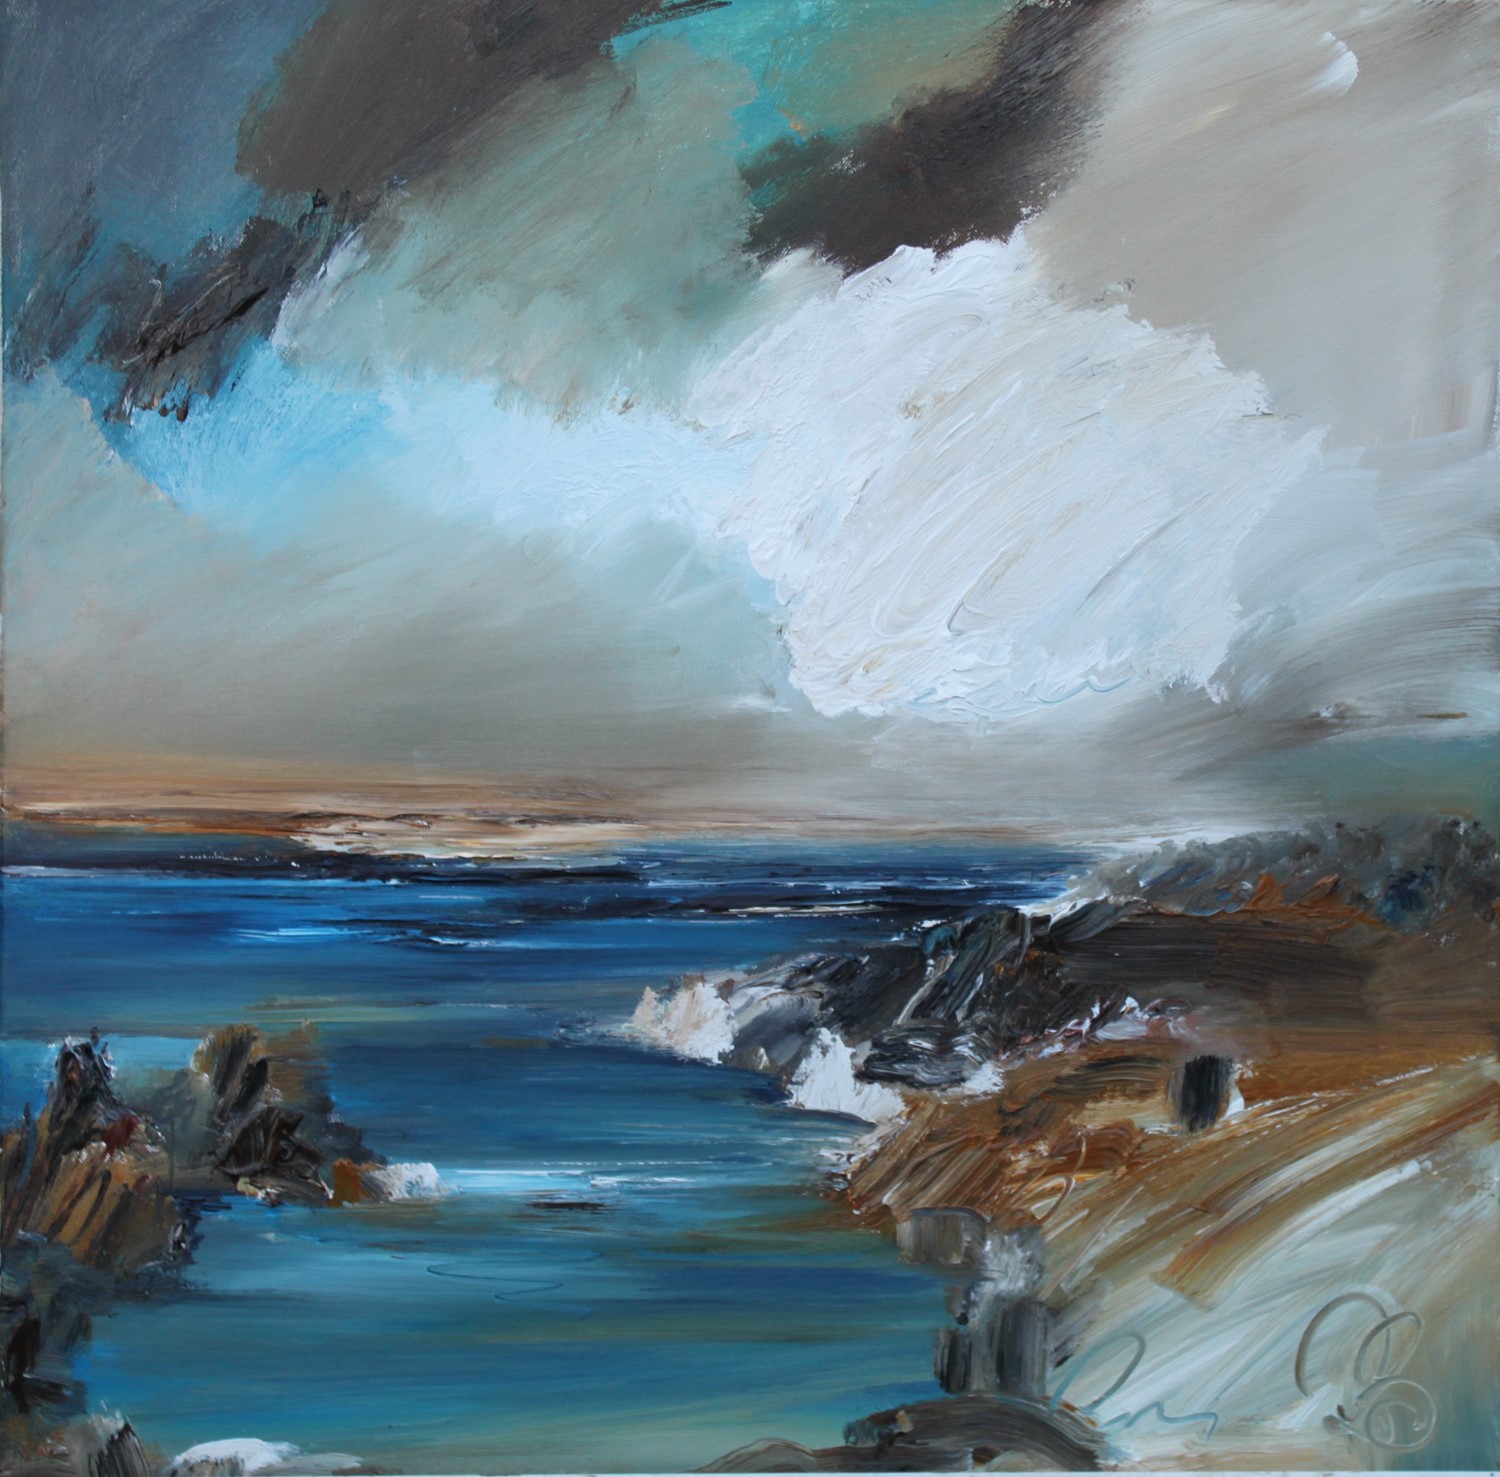 'Finding a cove' by artist Rosanne Barr